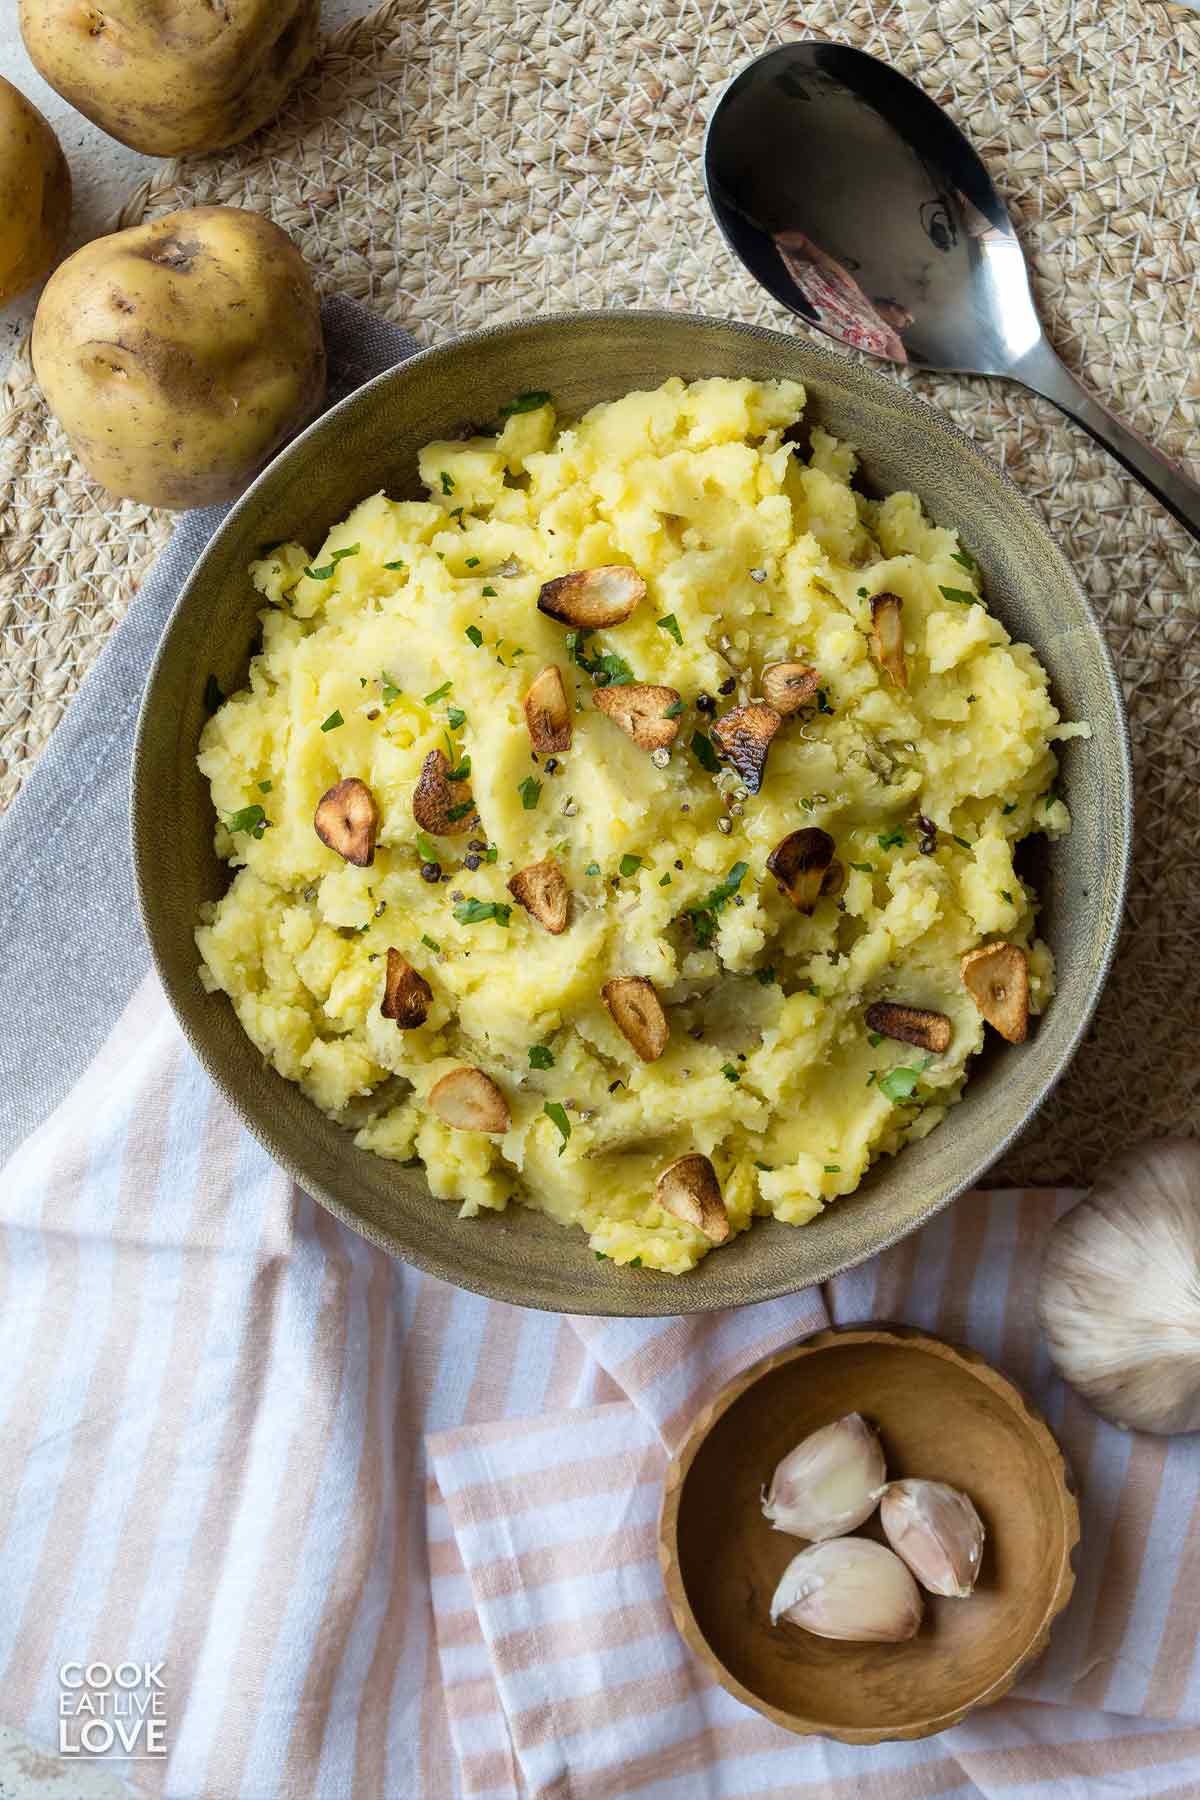 Mashed potatoes without butter served up on a table with whole potatoes and fresh garlic next to it.